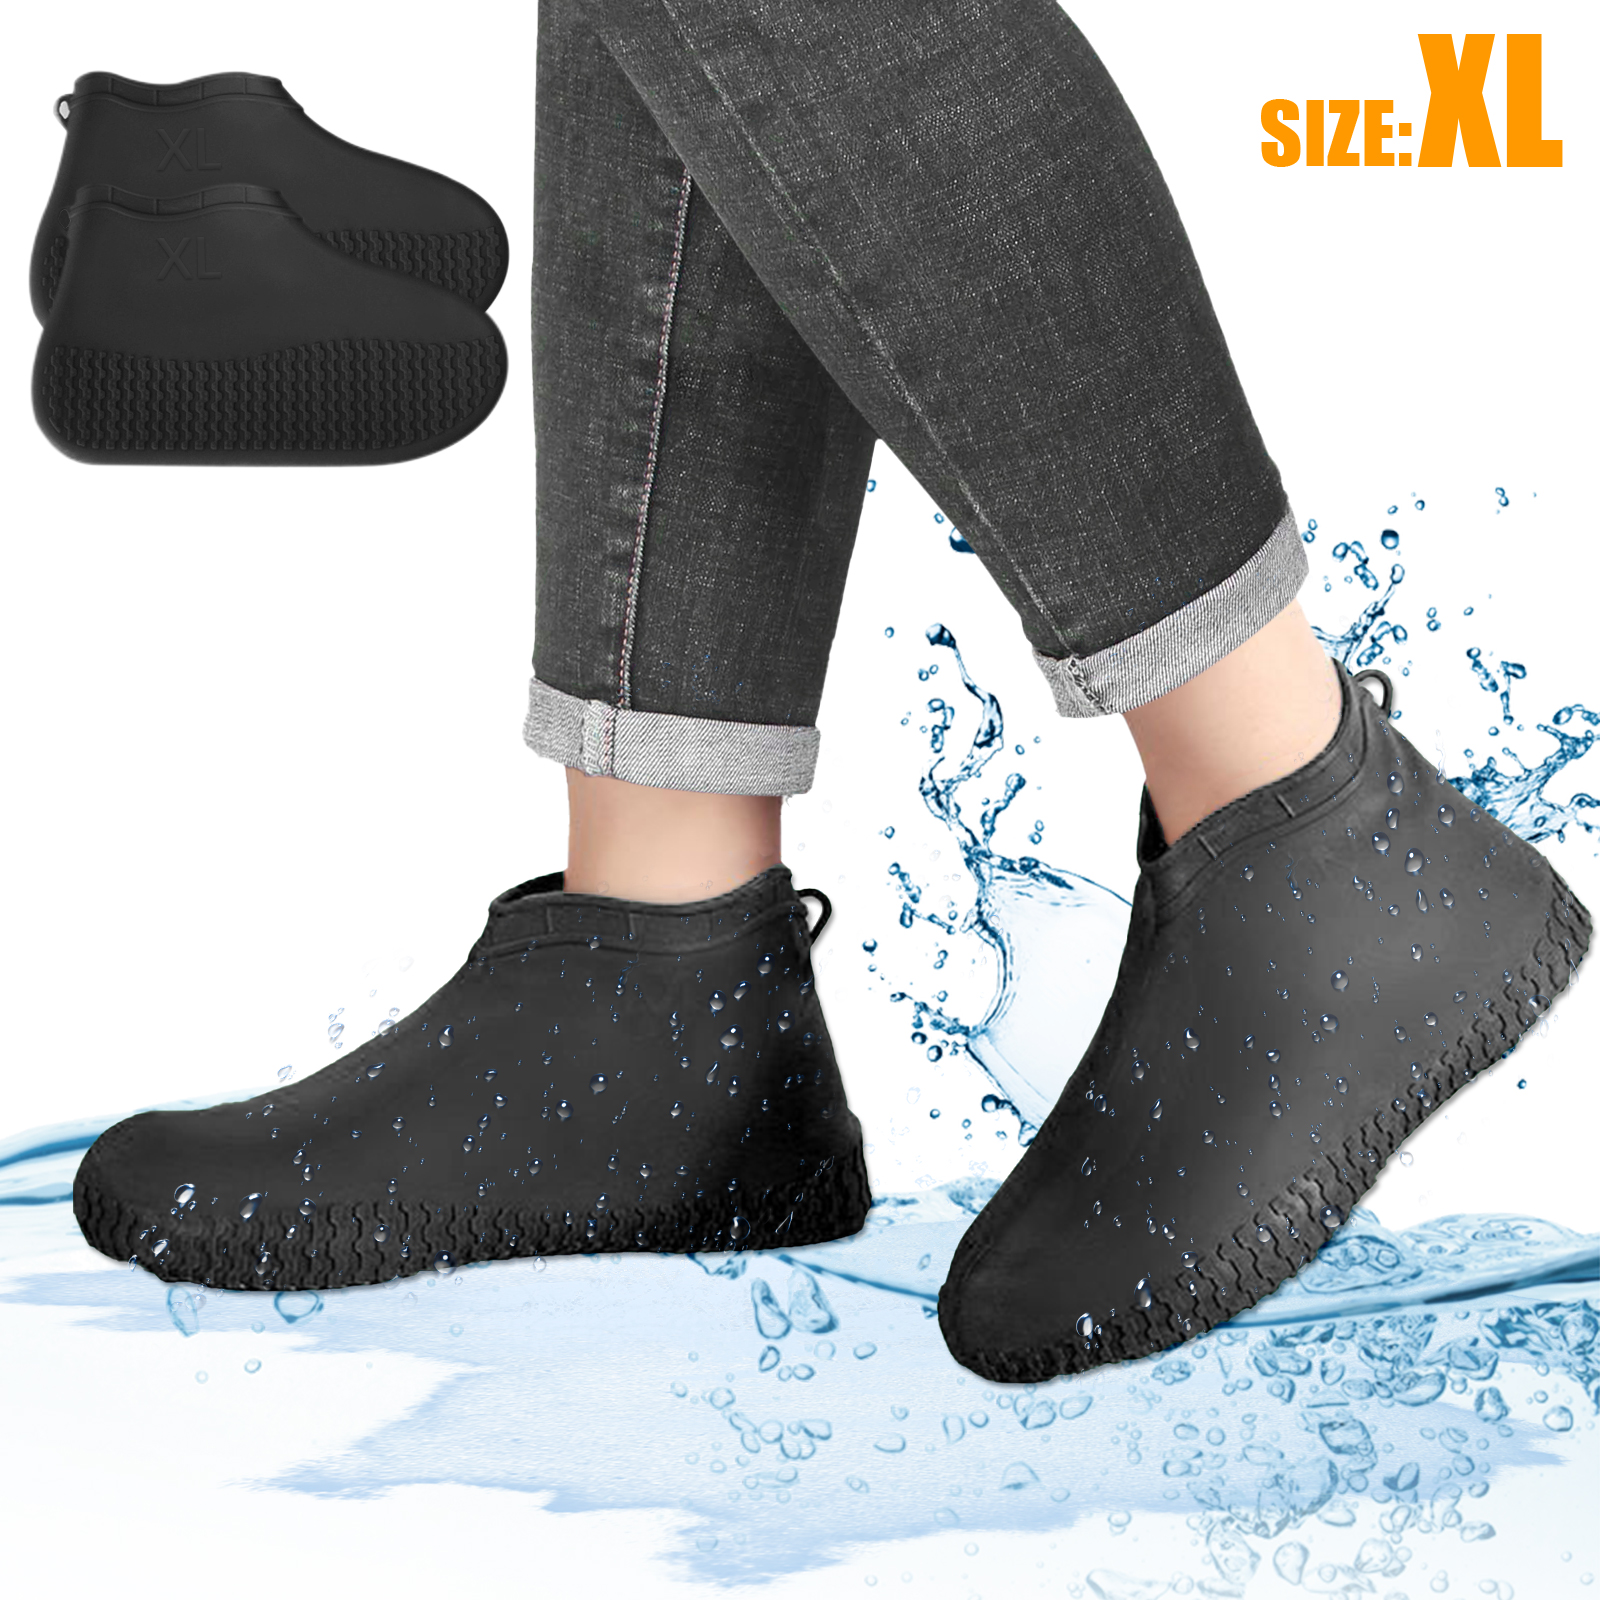 Silicone Reusable Rain Gear Boots Snow Shoe Covers Waterproof Shoes Overshoes YO 